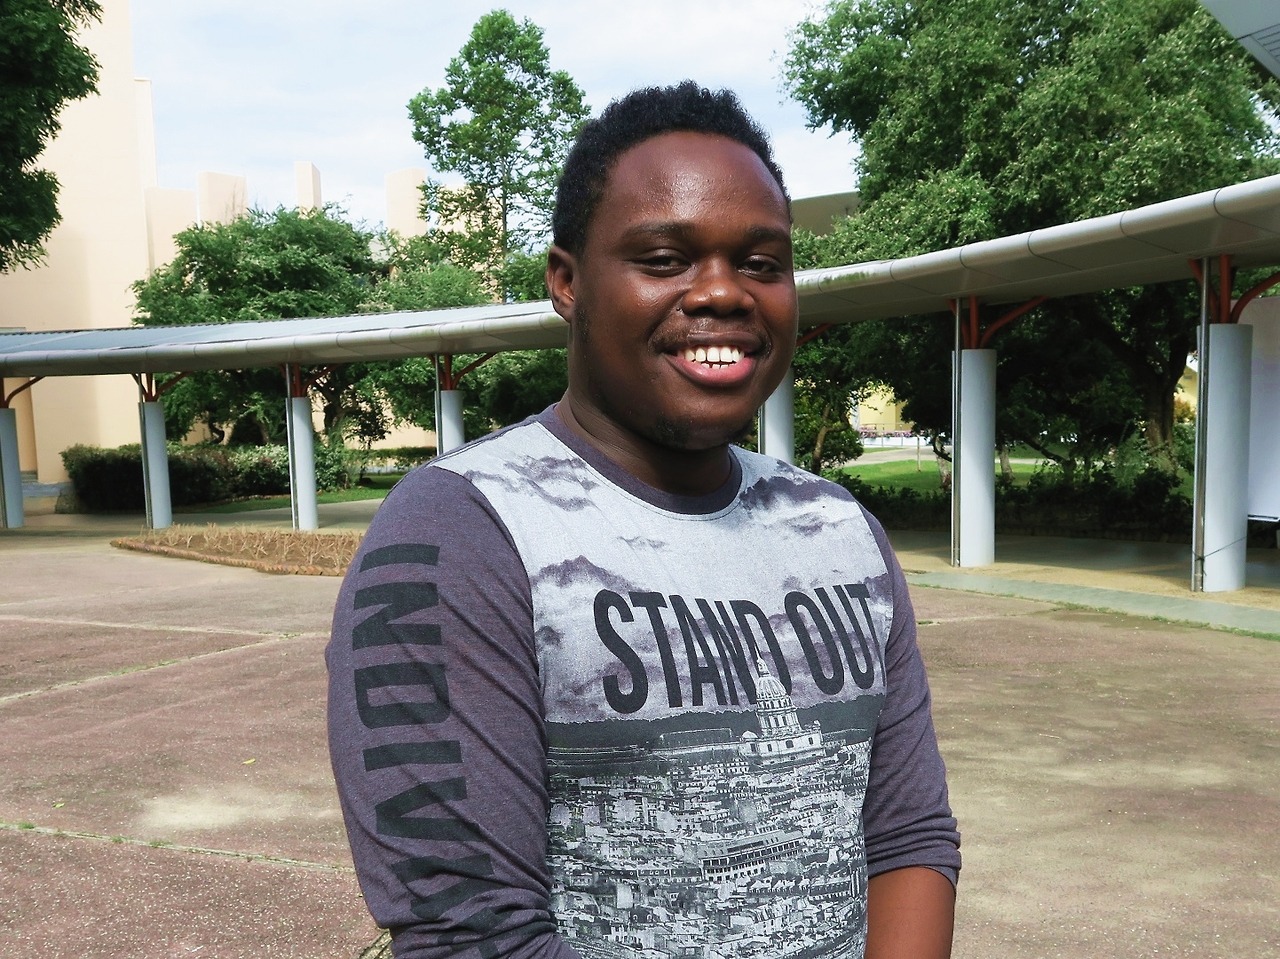 “I come from Zimbabwe, a nation of friendly people and beautiful scenery just like Malaysia. My experience here at Curtin Malaysia has been simply amazing. The learning experience has been very enriching. I have opportunities to develop leadership...